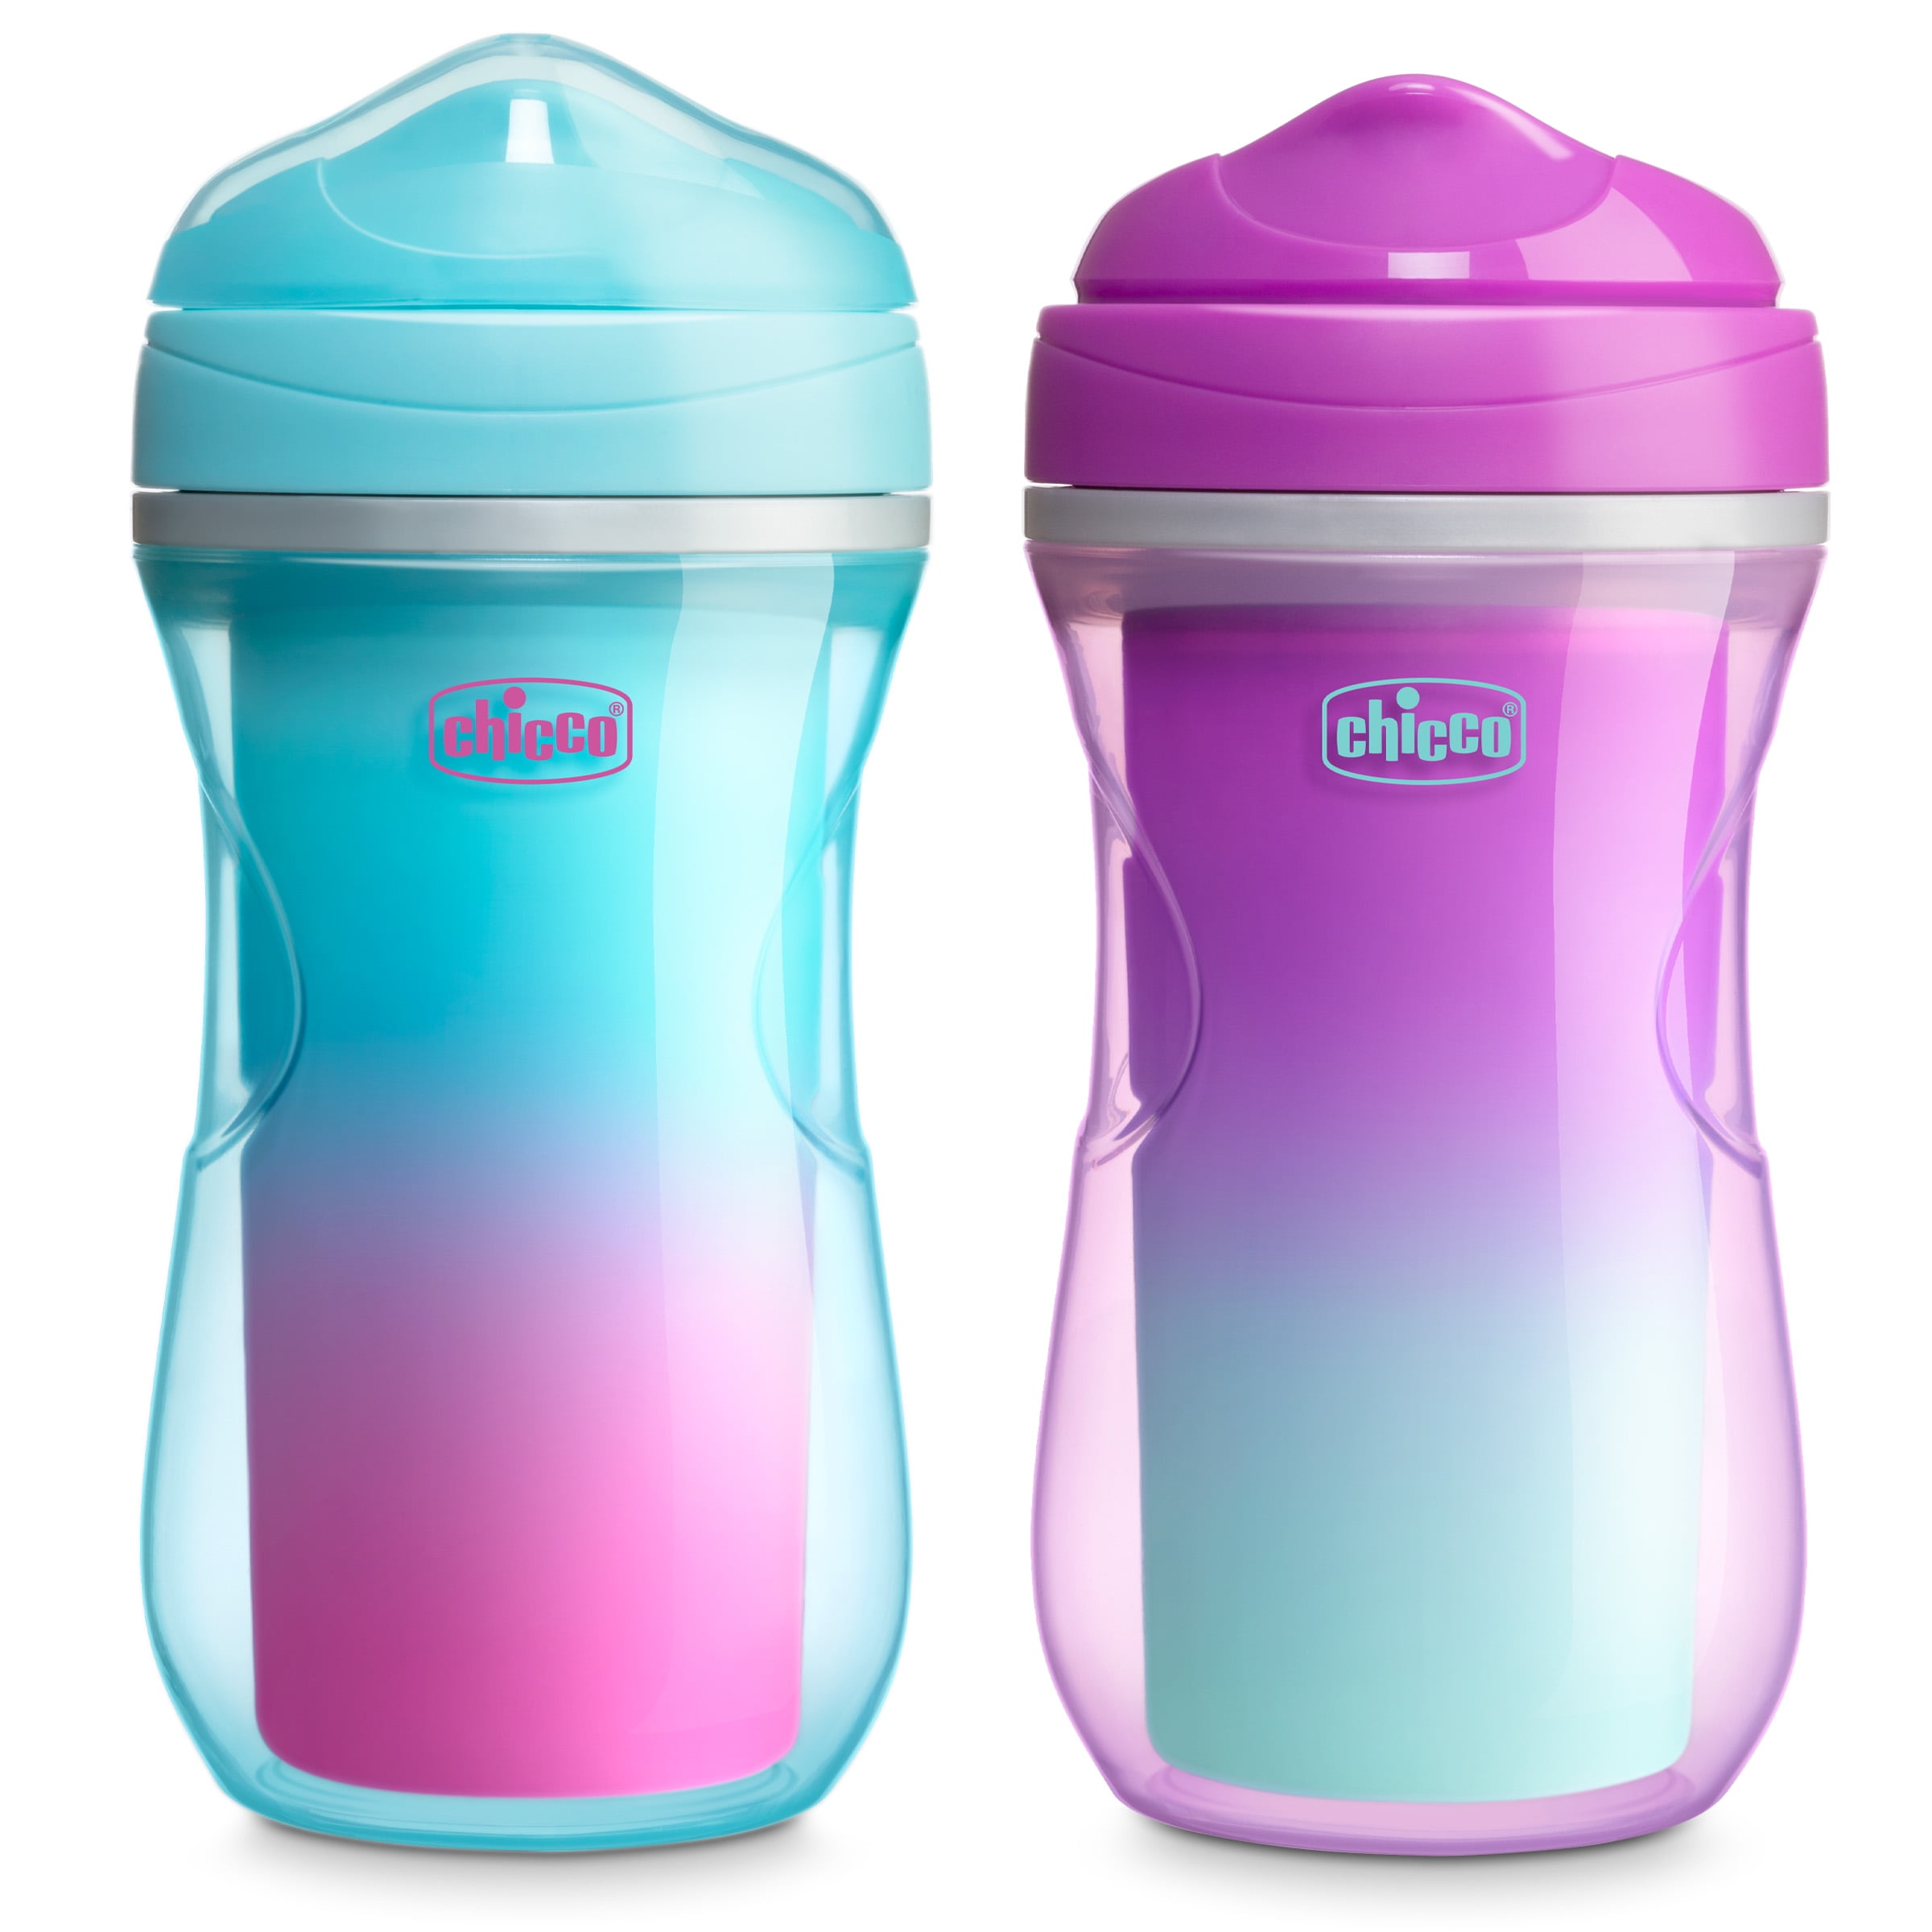 Nuk Insulated Cup-Like Rim Toddler Sippy Cup, 9 oz, 2 Pack